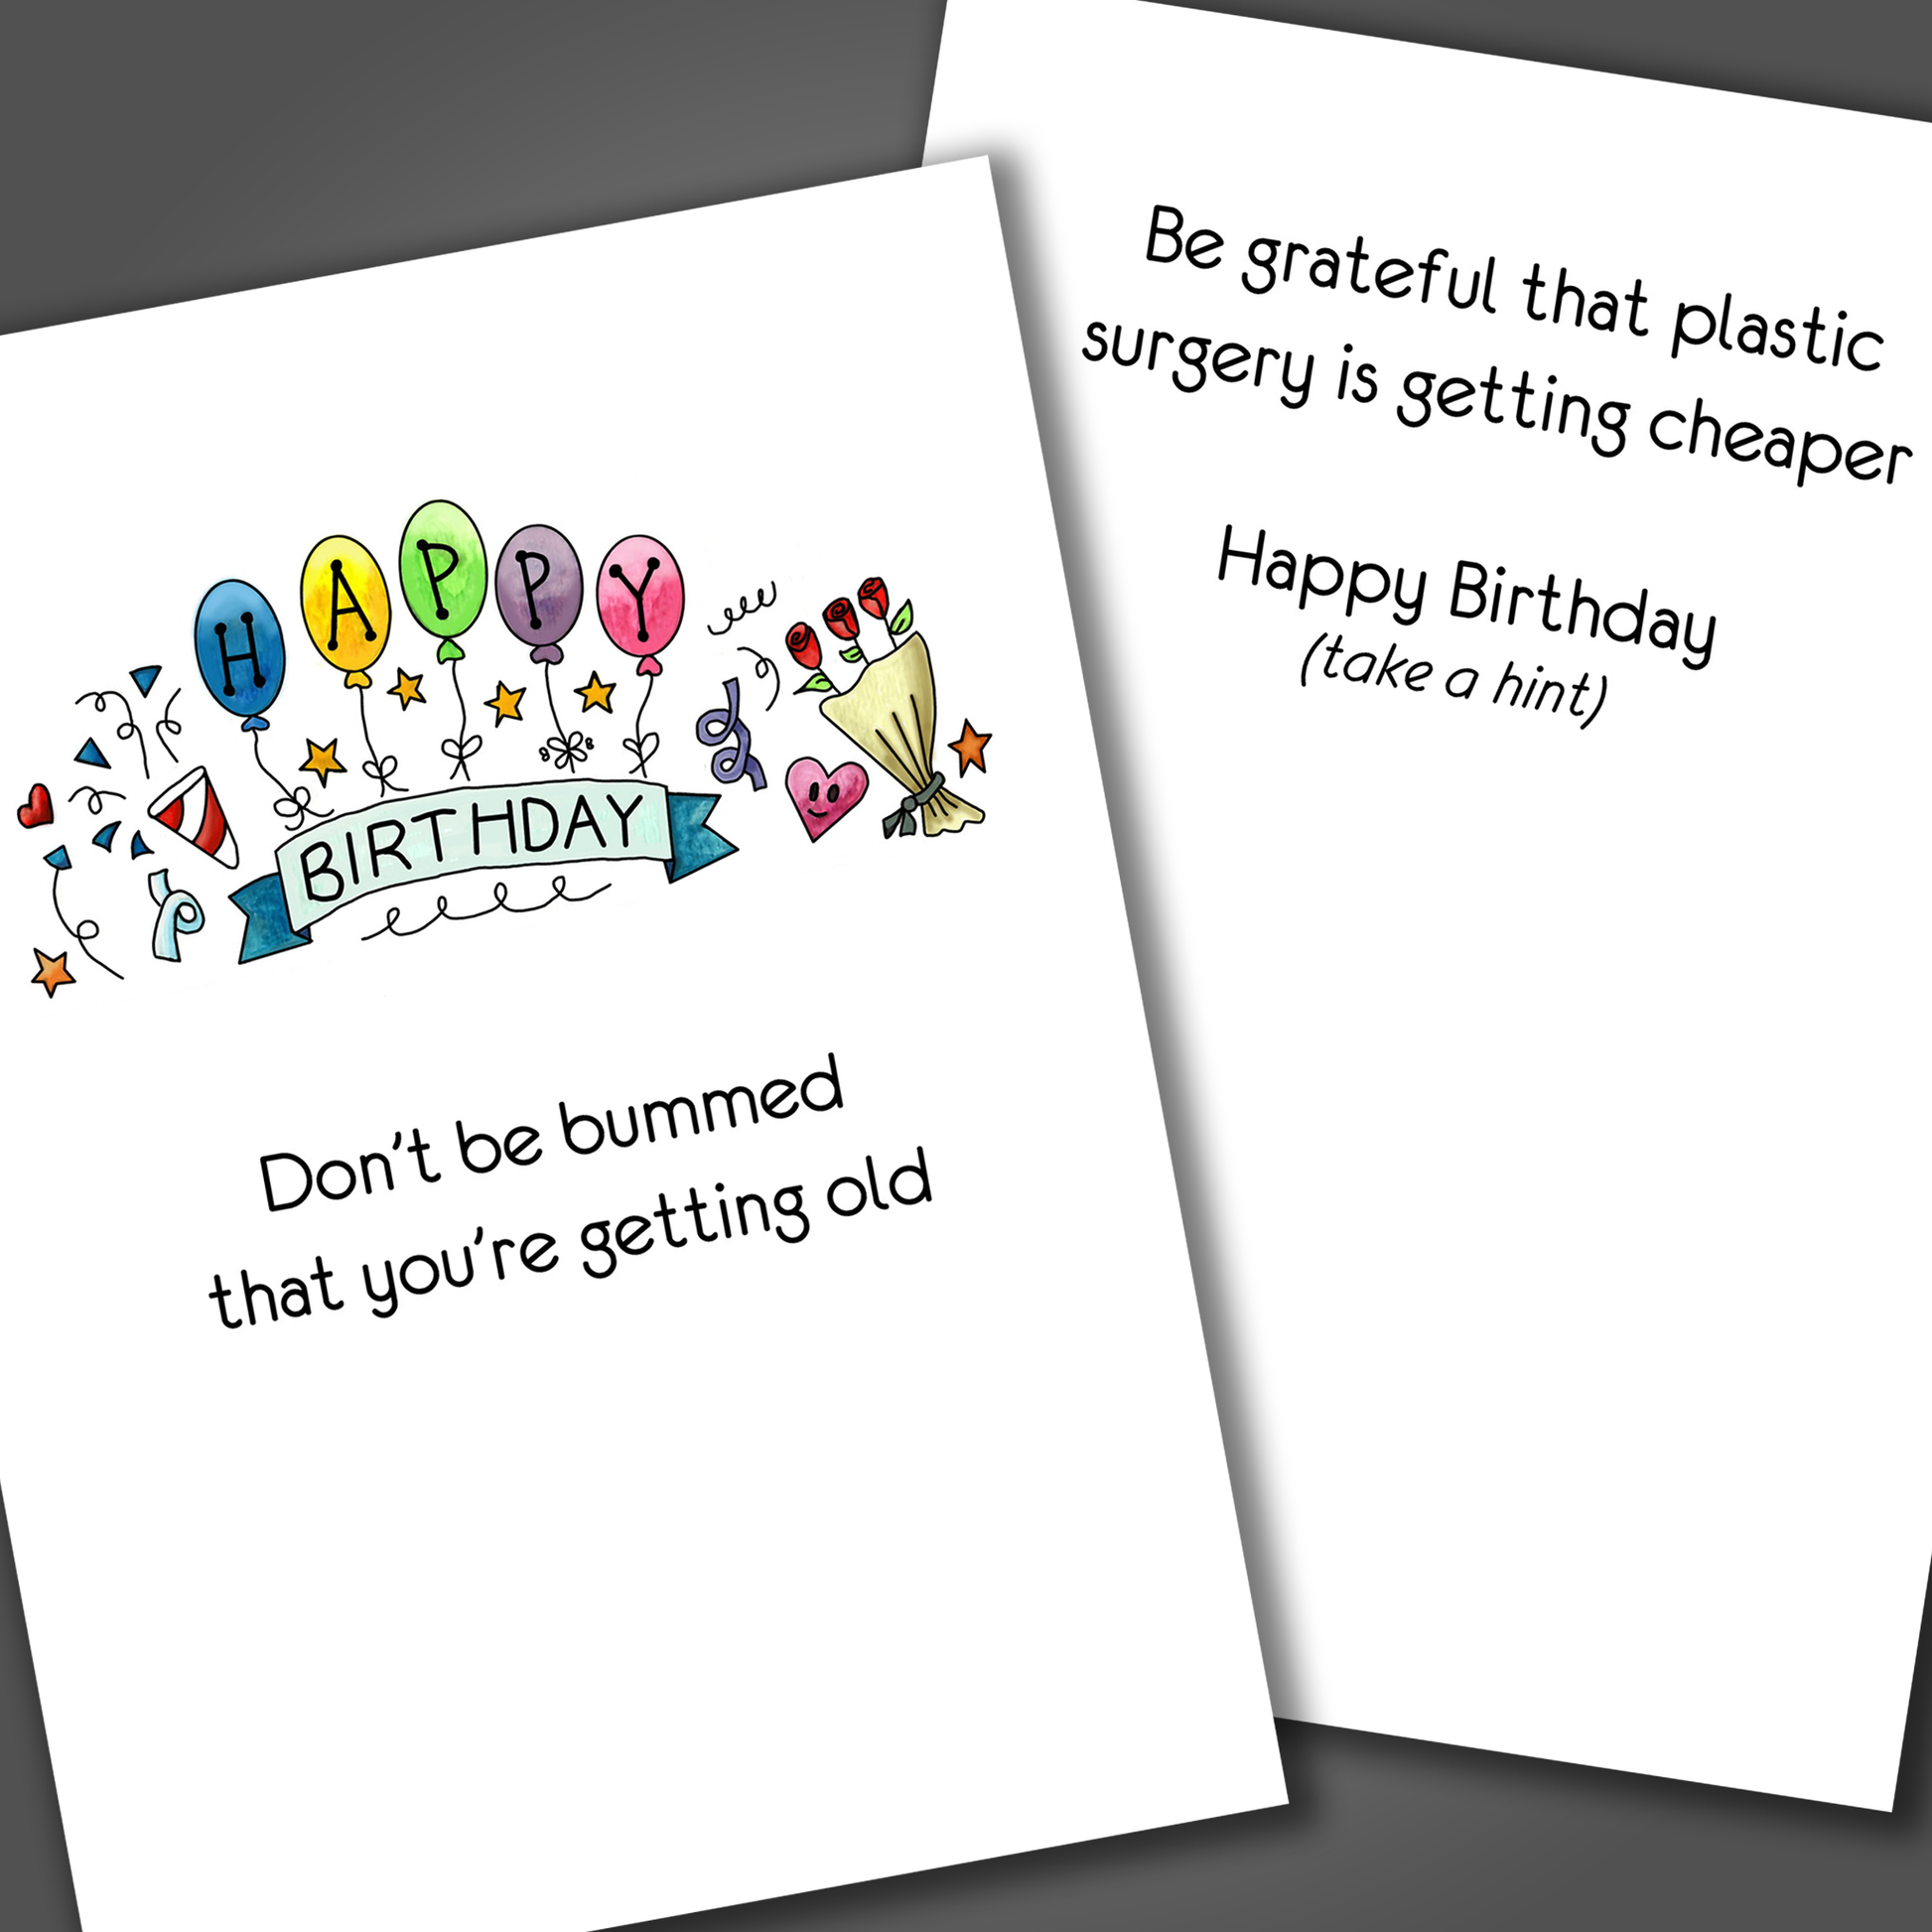 Funny birthday card with balloons and party favors drawn on front of card and a funny joke inside of the card that says be thankful plastic surgery is getting cheaper.